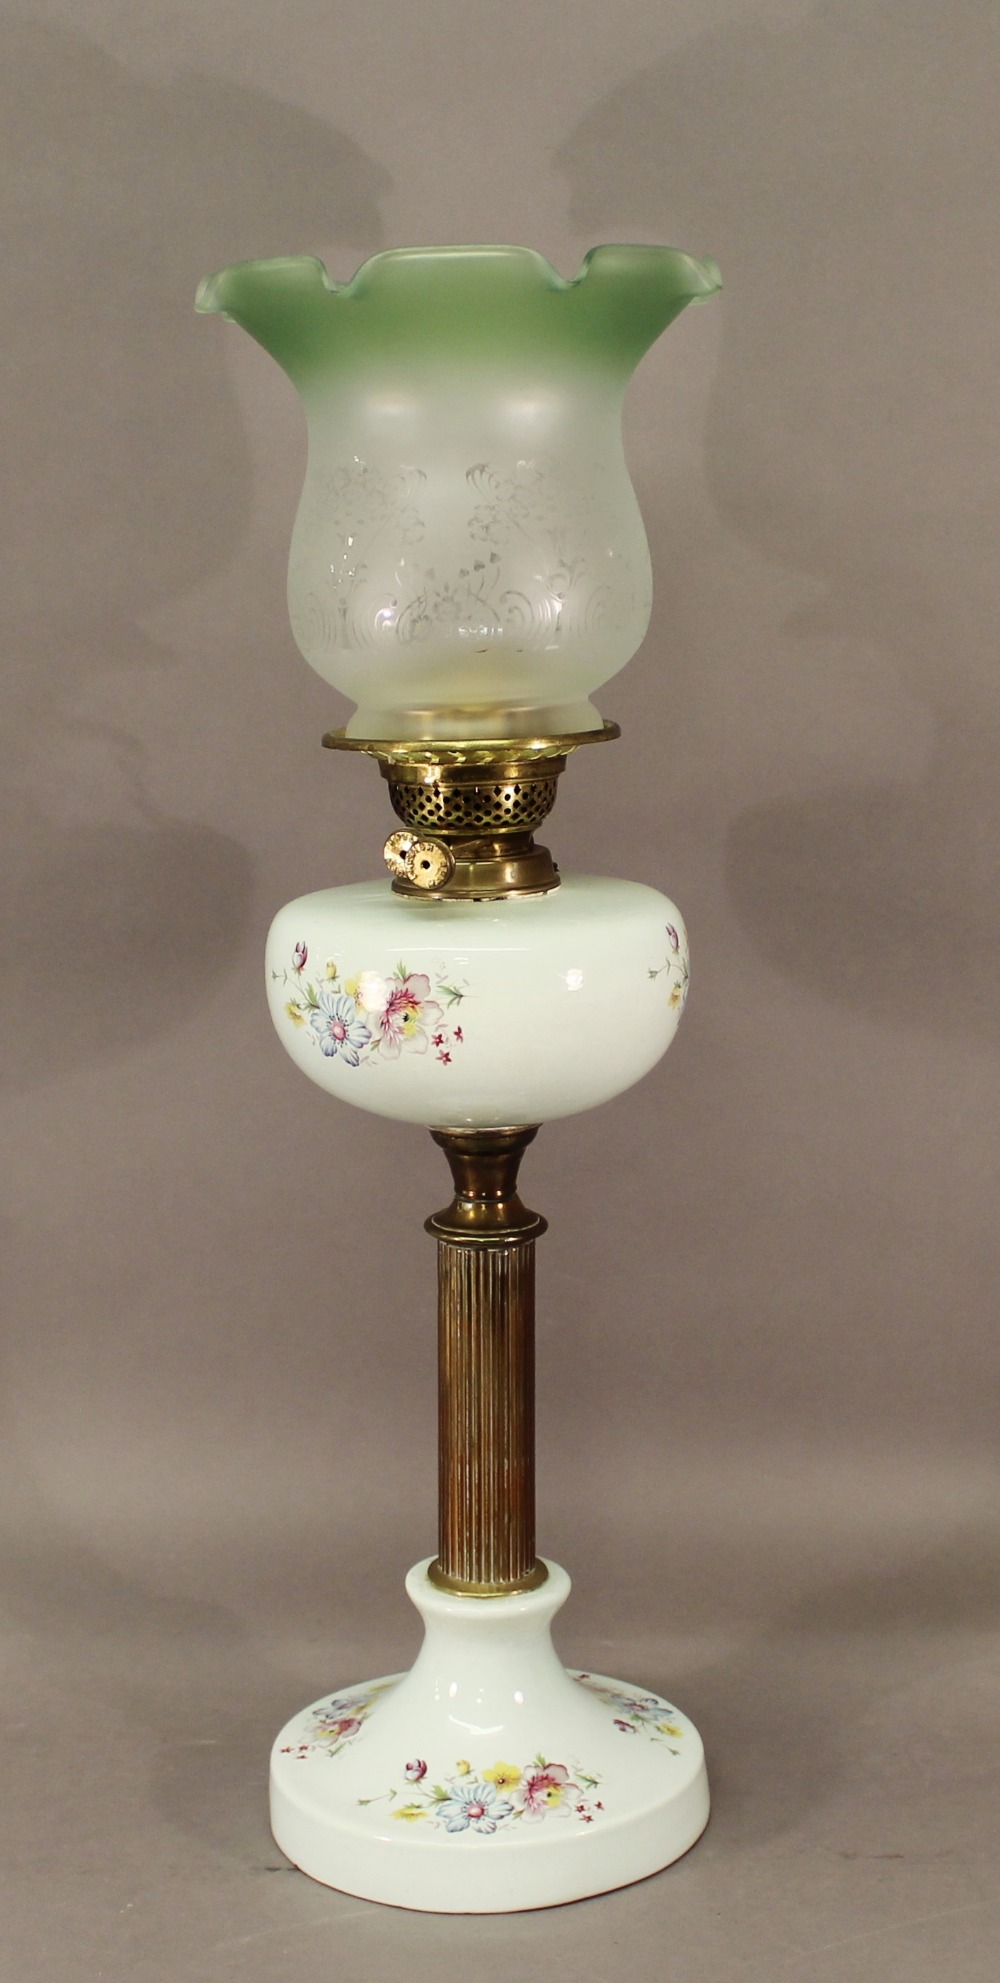 A 20TH CENTURY BRASS AND CERAMIC COLUMN OIL LAMP having a green tinted etched glass shade, brass